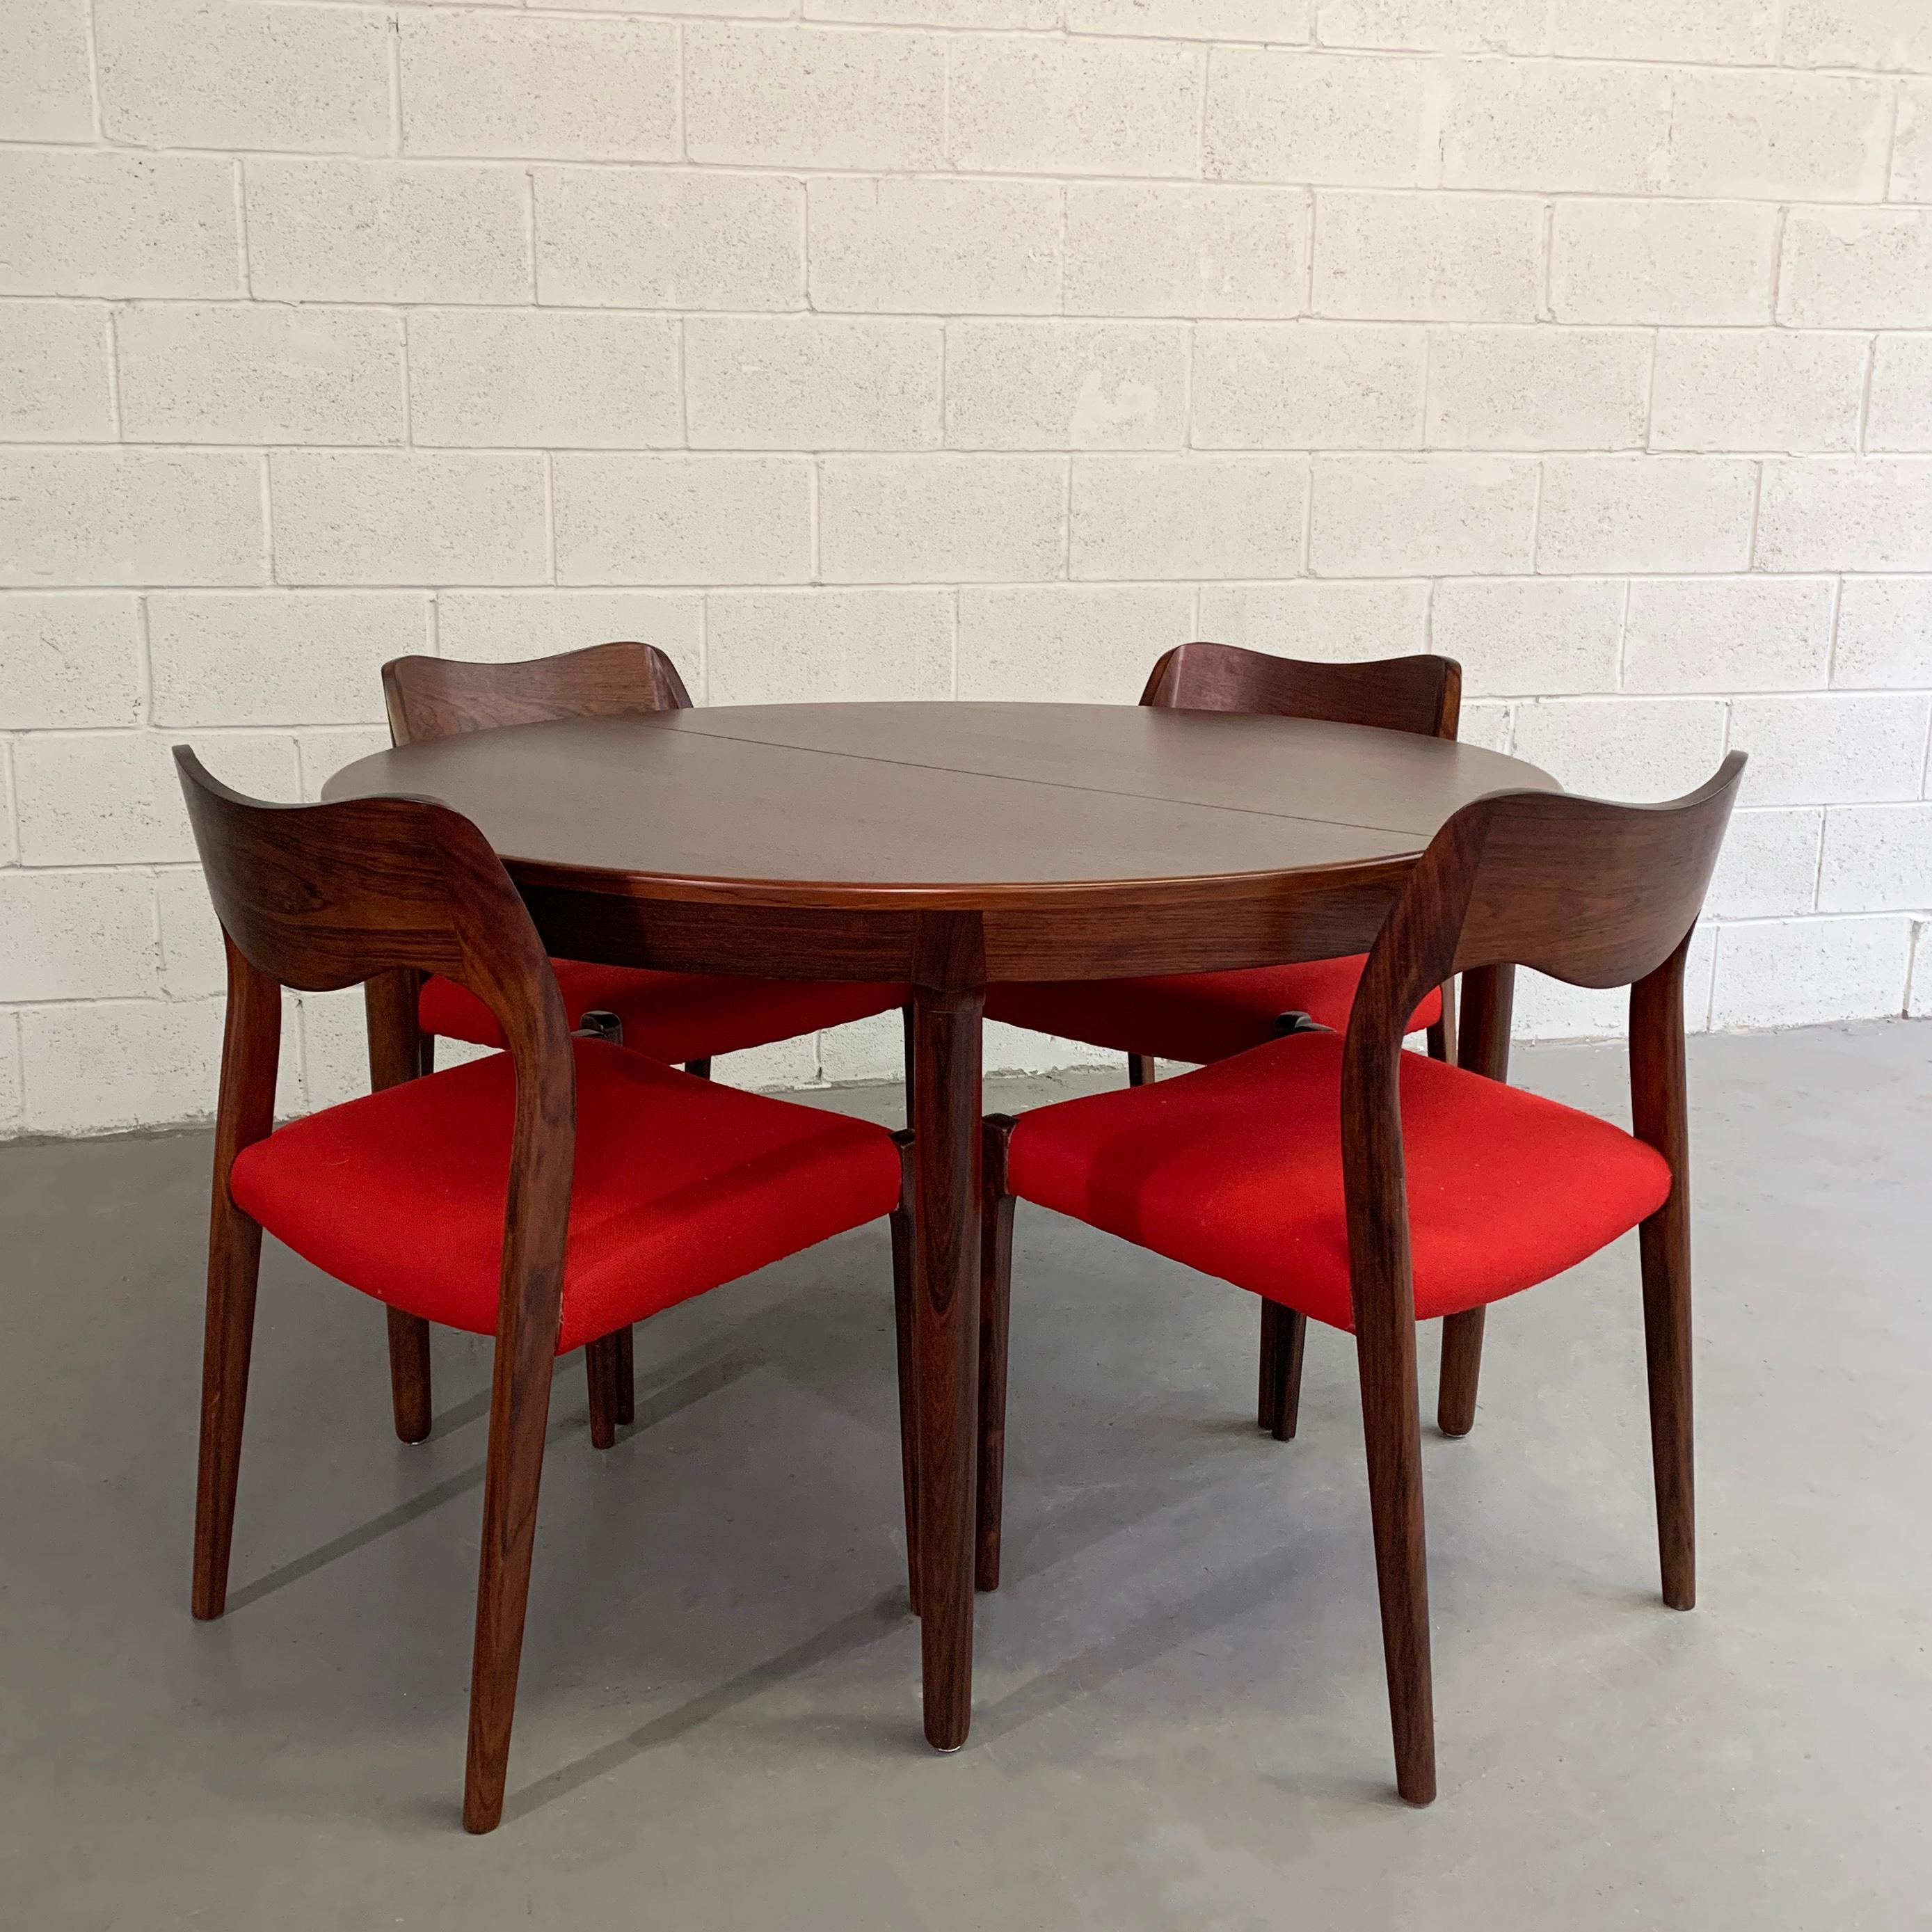 Danish modern, rosewood dining set by Niels O Moller features 4 model #71 chairs and two separate 19.5 inch leaves that extend the table to 66 inches with one leaf up to 86 inches with both leaves. The chairs measure 19.5 W x 18 D x 30.25 HT, seat